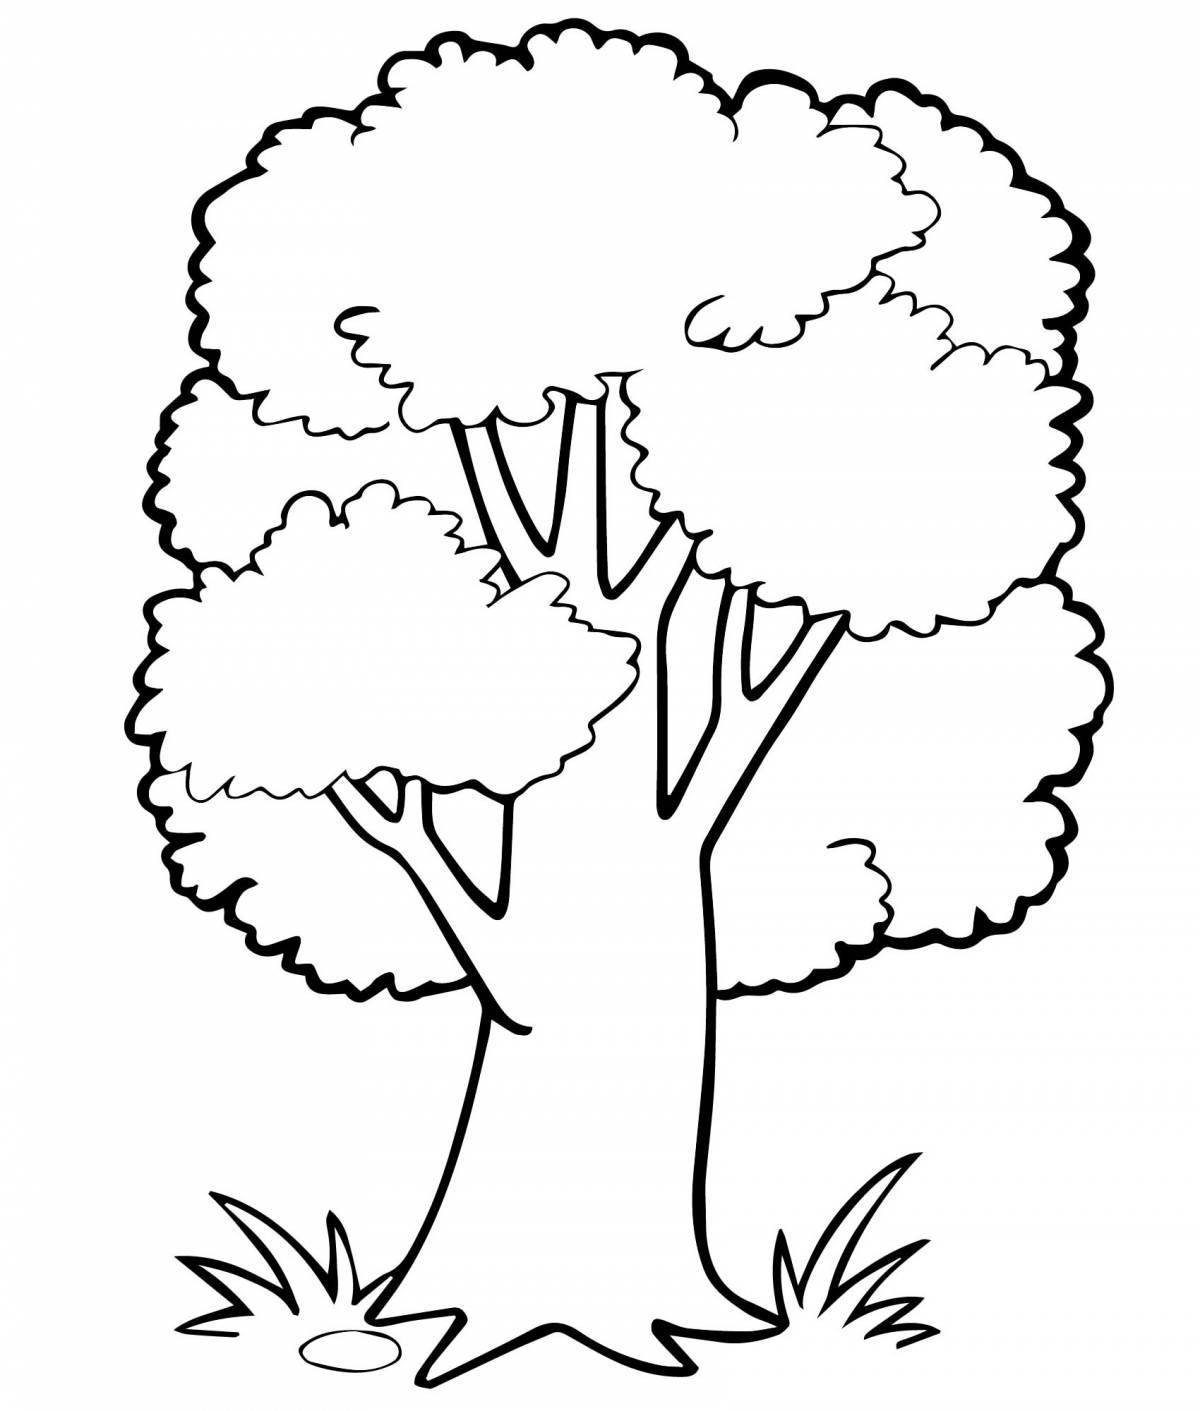 Adorable tree coloring page for kids